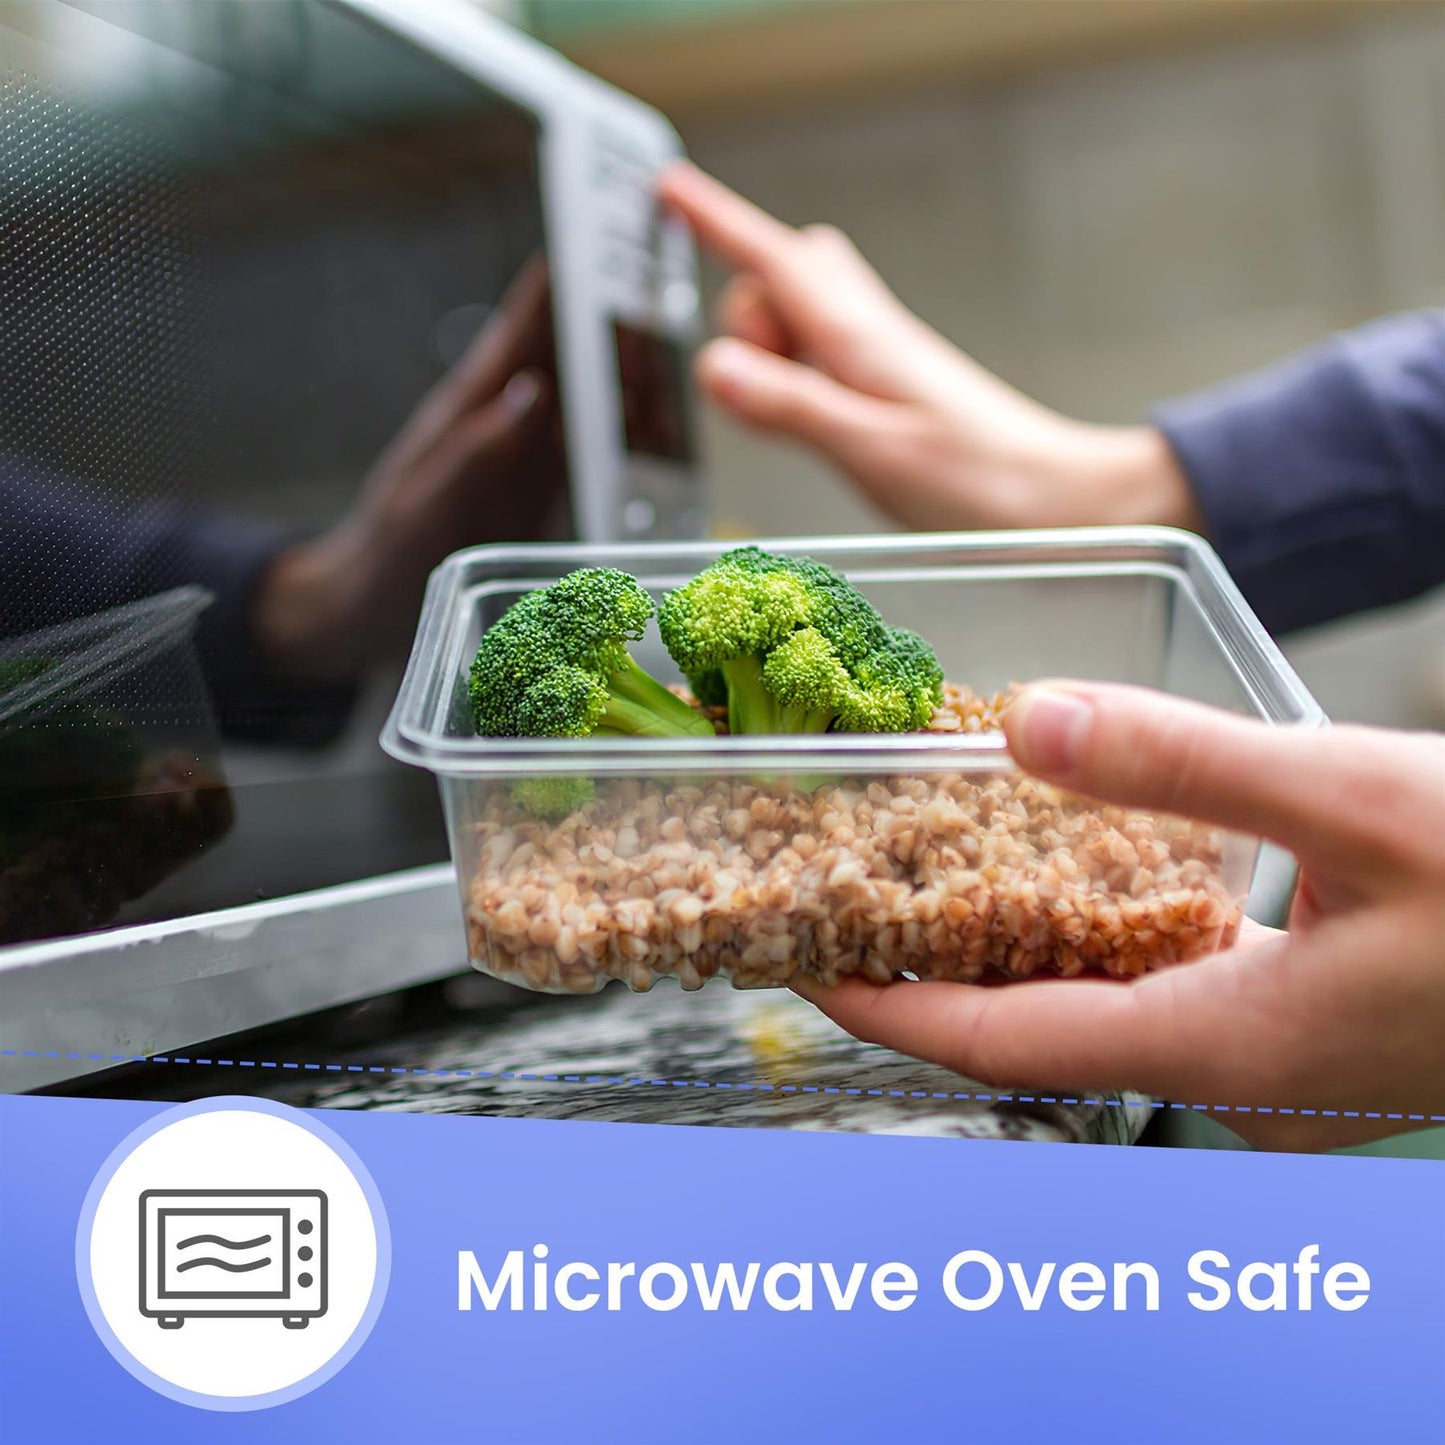 Set Of Airtight And Leak-Proof Plastic Meal Boxes With A Clip Seal Lock